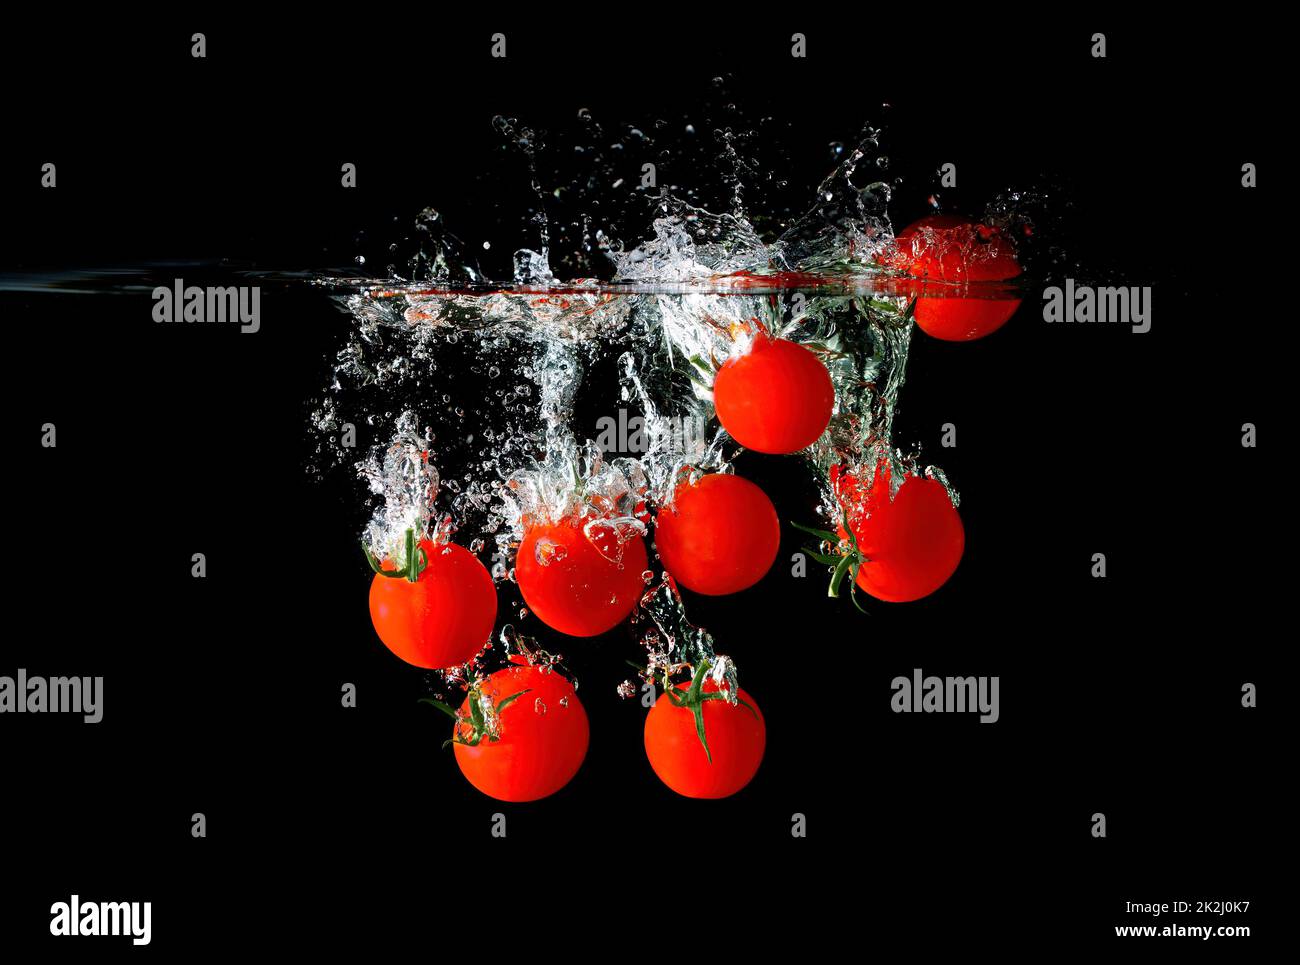 Ripe cocktail tomatoes dropped in water with splashes and bubbles isolated on black background. Stock Photo